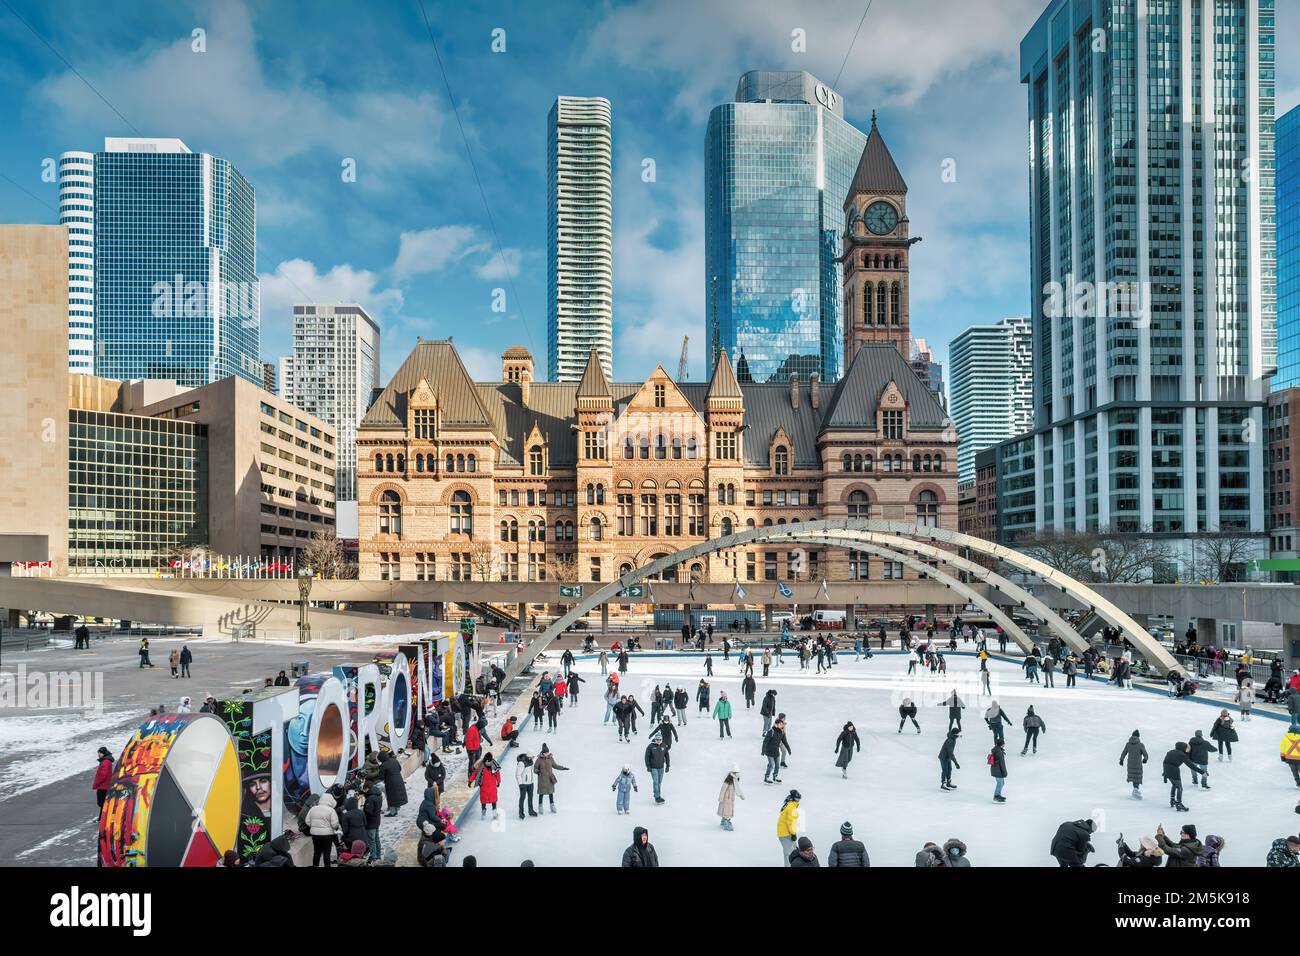 Nathan Phillips Square Skating Rink in downtown Toronto, Ontario, Canada Winter Stock Photo